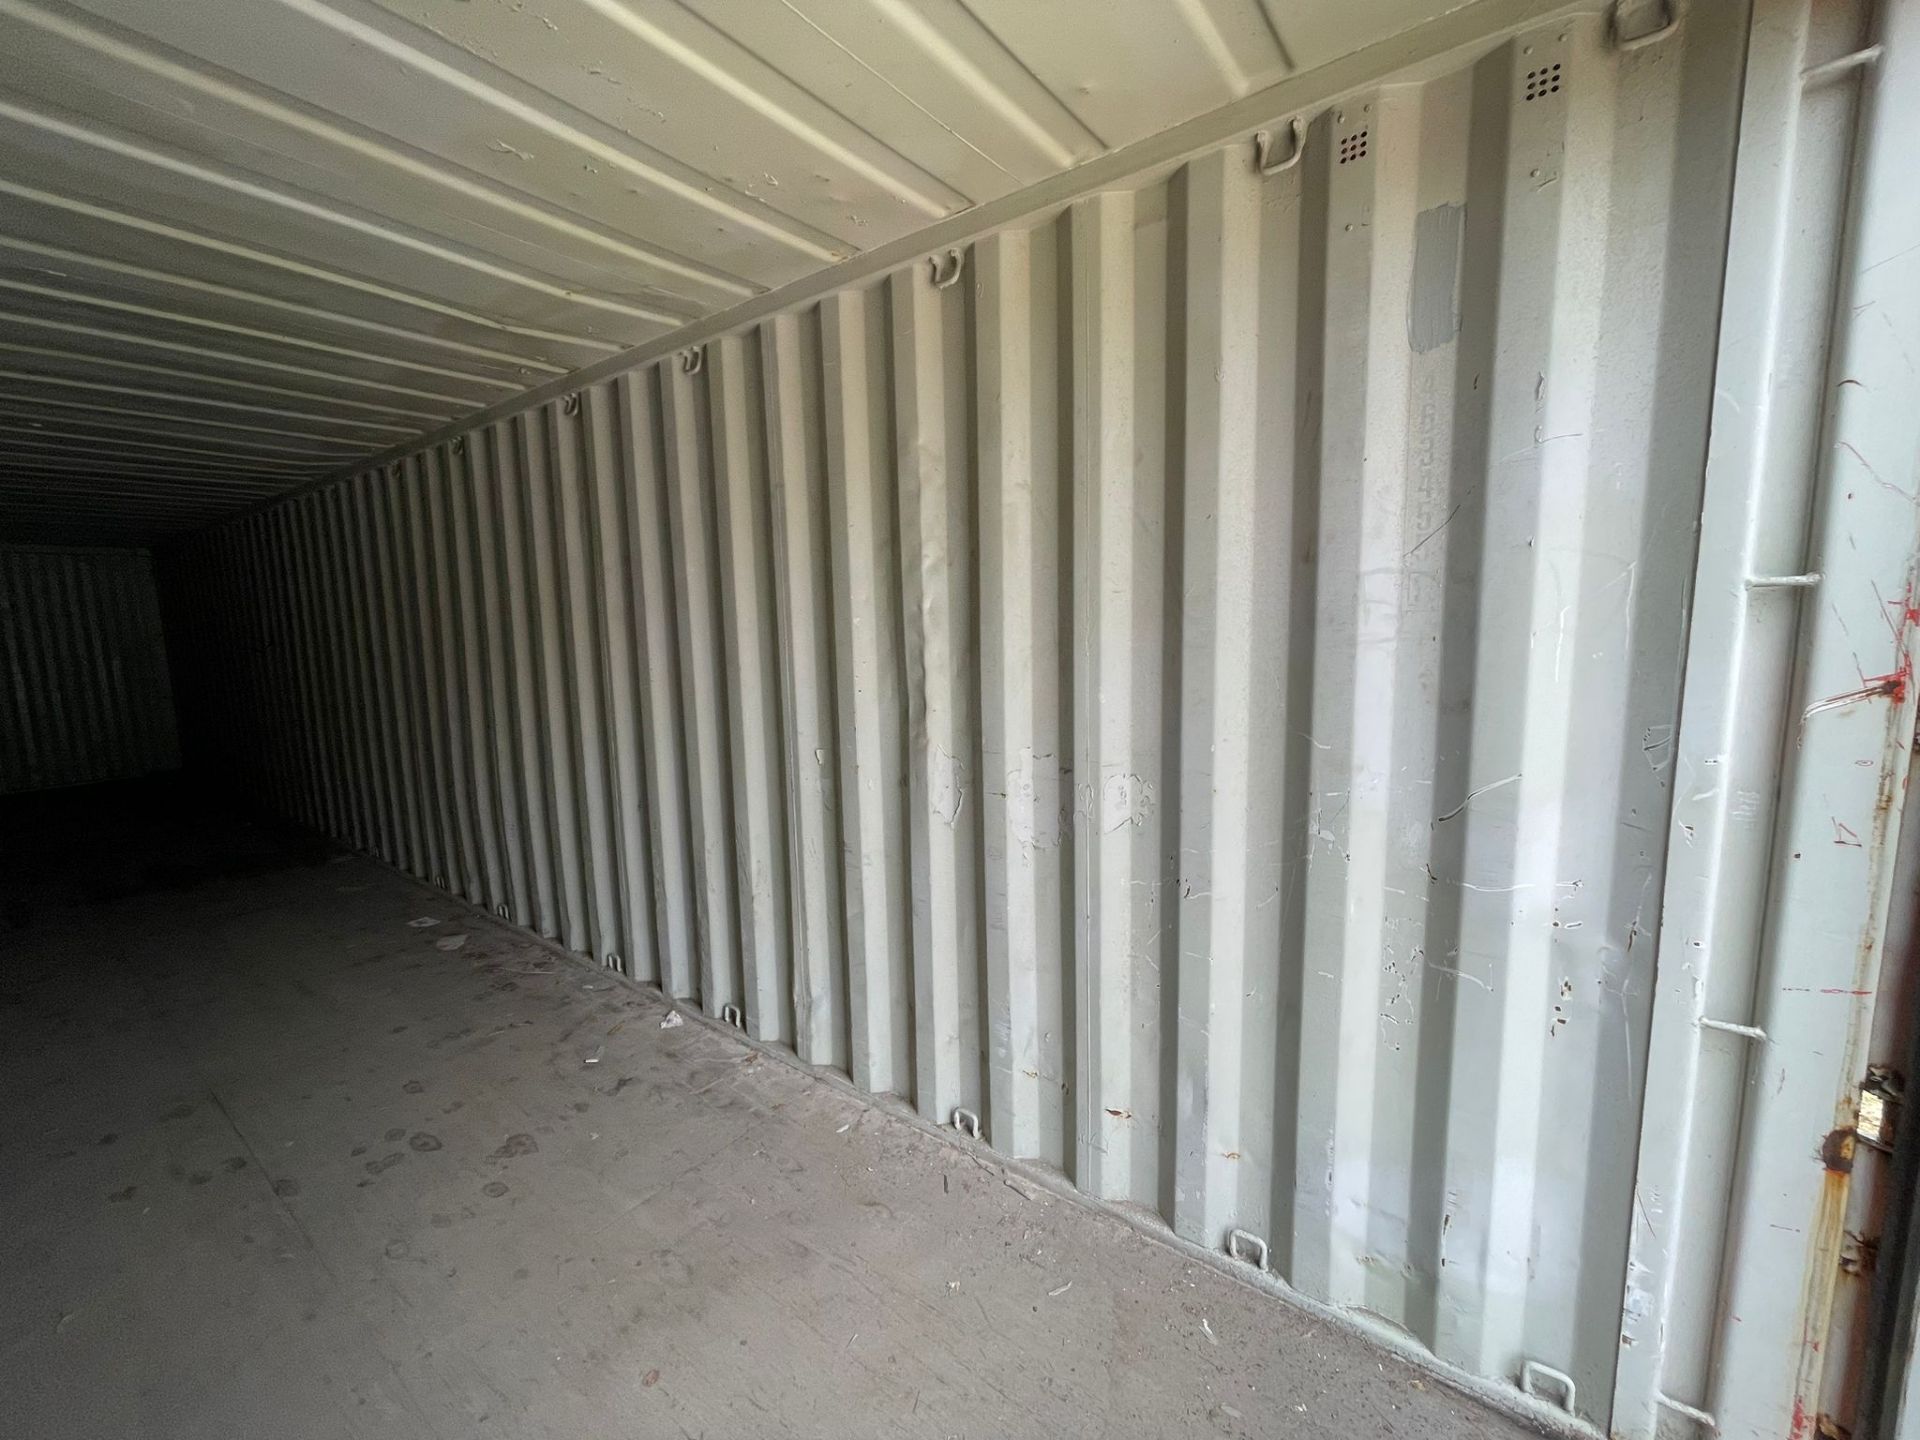 Shipping Container - ref 4634553 - NO RESERVE (40’ GP - Standard) - Image 2 of 4